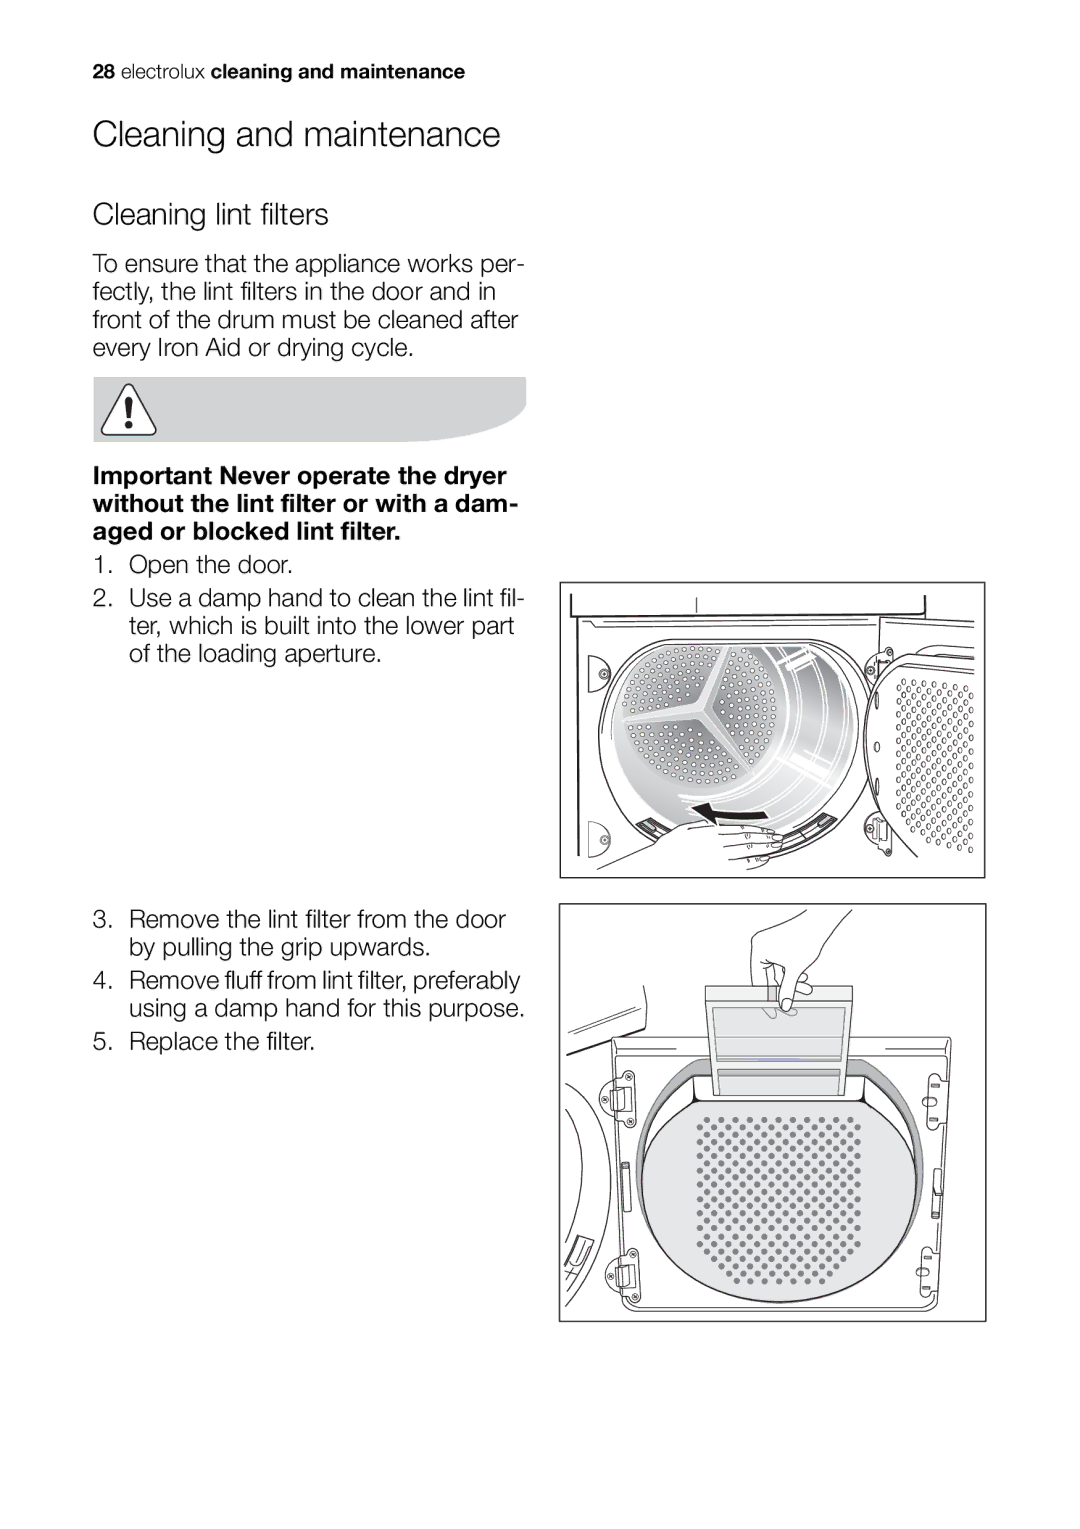 Electrolux EDI 96150 W user manual Cleaning and maintenance, Cleaning lint filters 